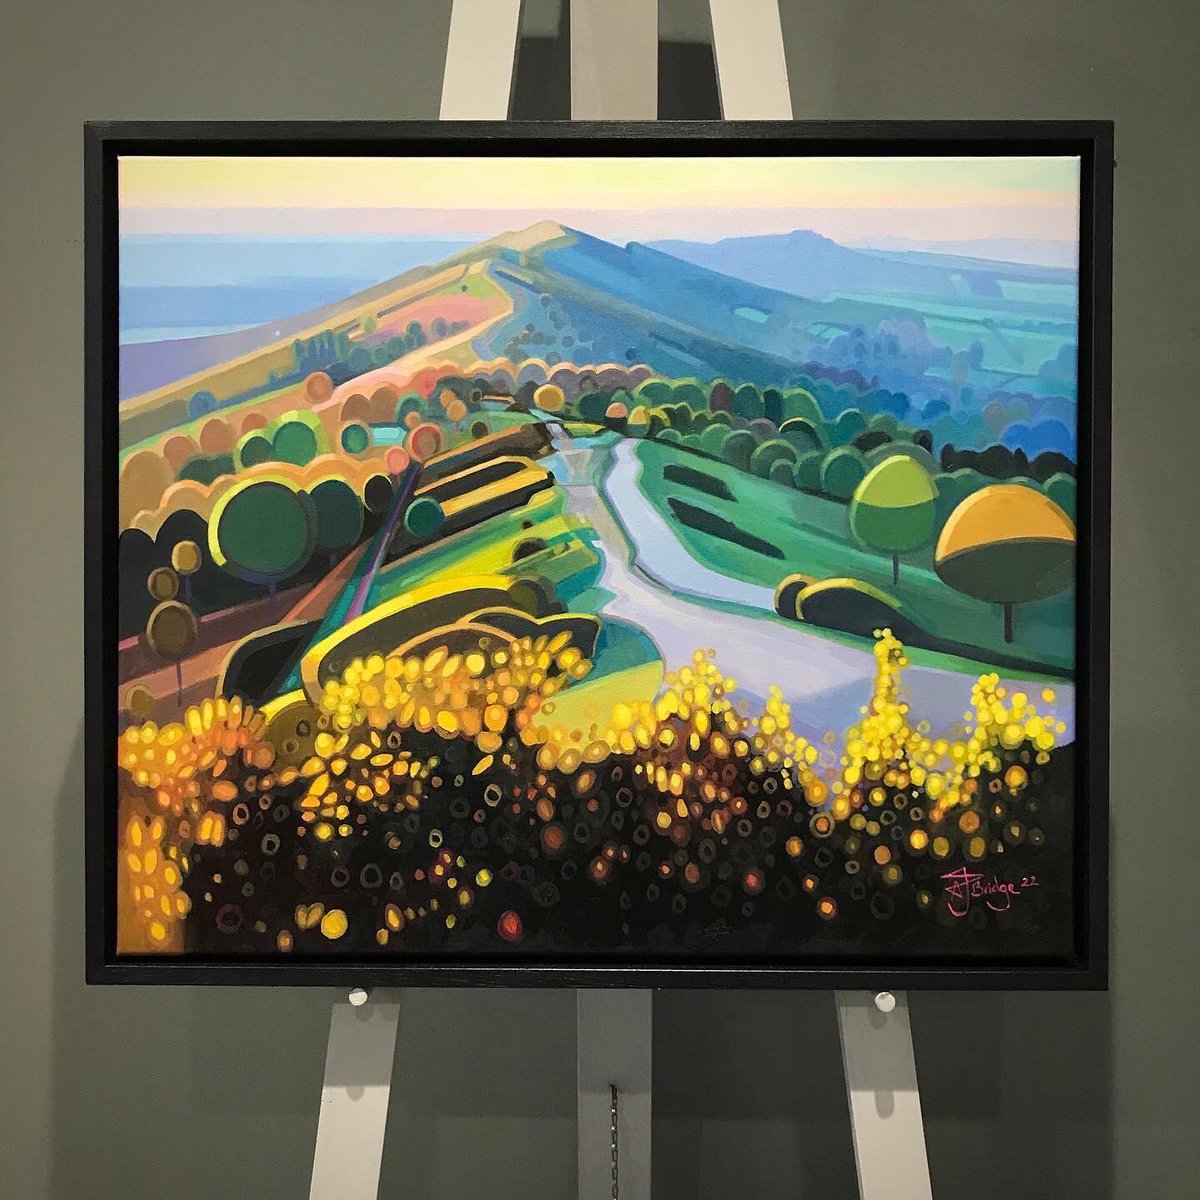 ‘Malvern Hills Gorse’ 20x24” oil on canvas. Get in touch for details. #malvernhills #malvern #malvernartist #malvernart #greatmalvern #malvernhillswalk #malvernhillshour #antonybridge #yellowgorse #gorse #gorsepainting #oilpainting #contemporarypainting  #worcestershire